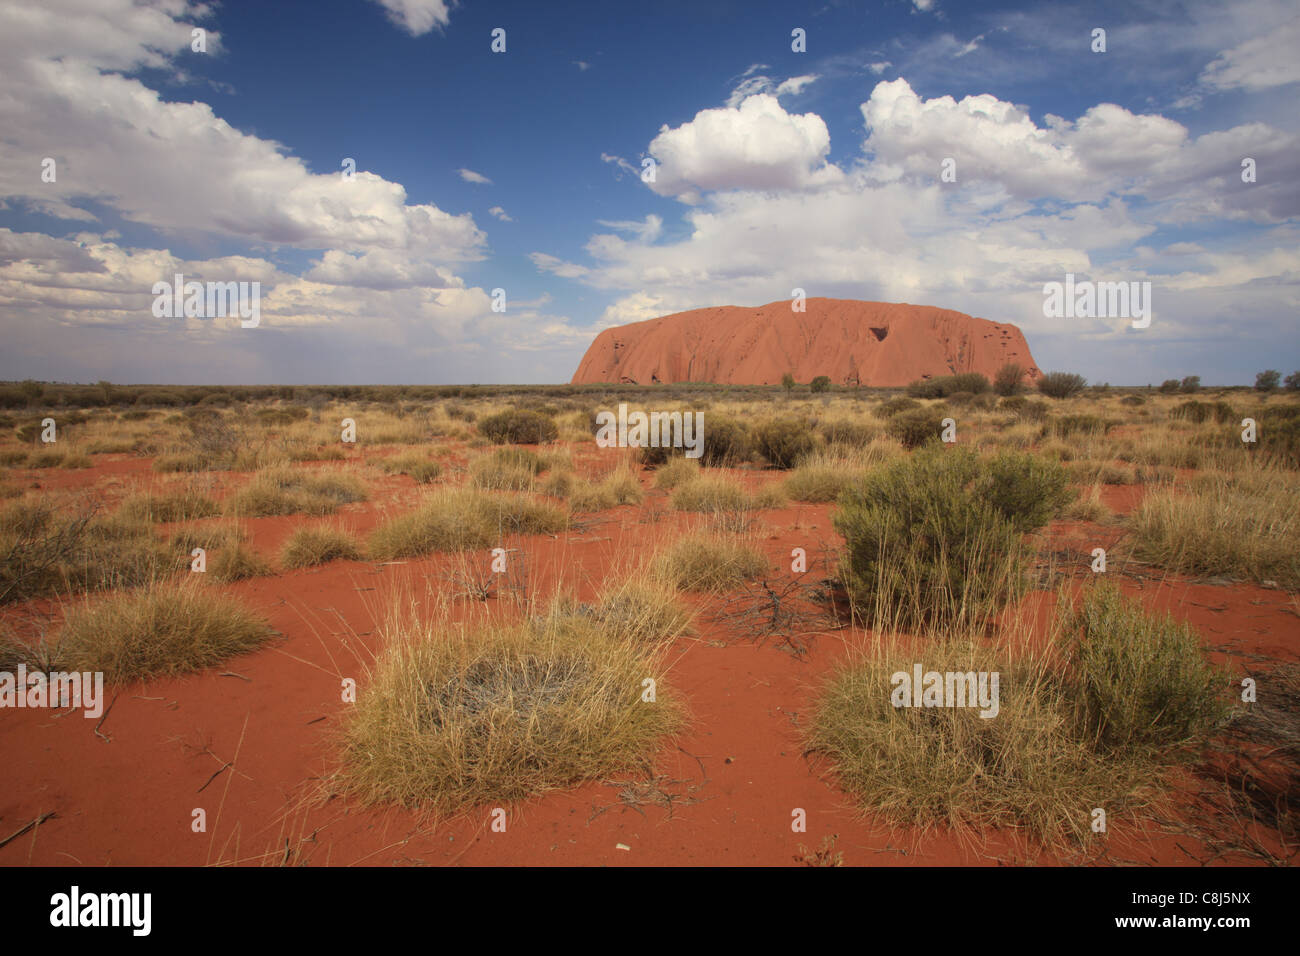 Ayers Rock, Uluru, Australia, Central australia, Outback, red sand, Spinifex, clouds, Northern Territory, desert, Red Centre, Ab Stock Photo